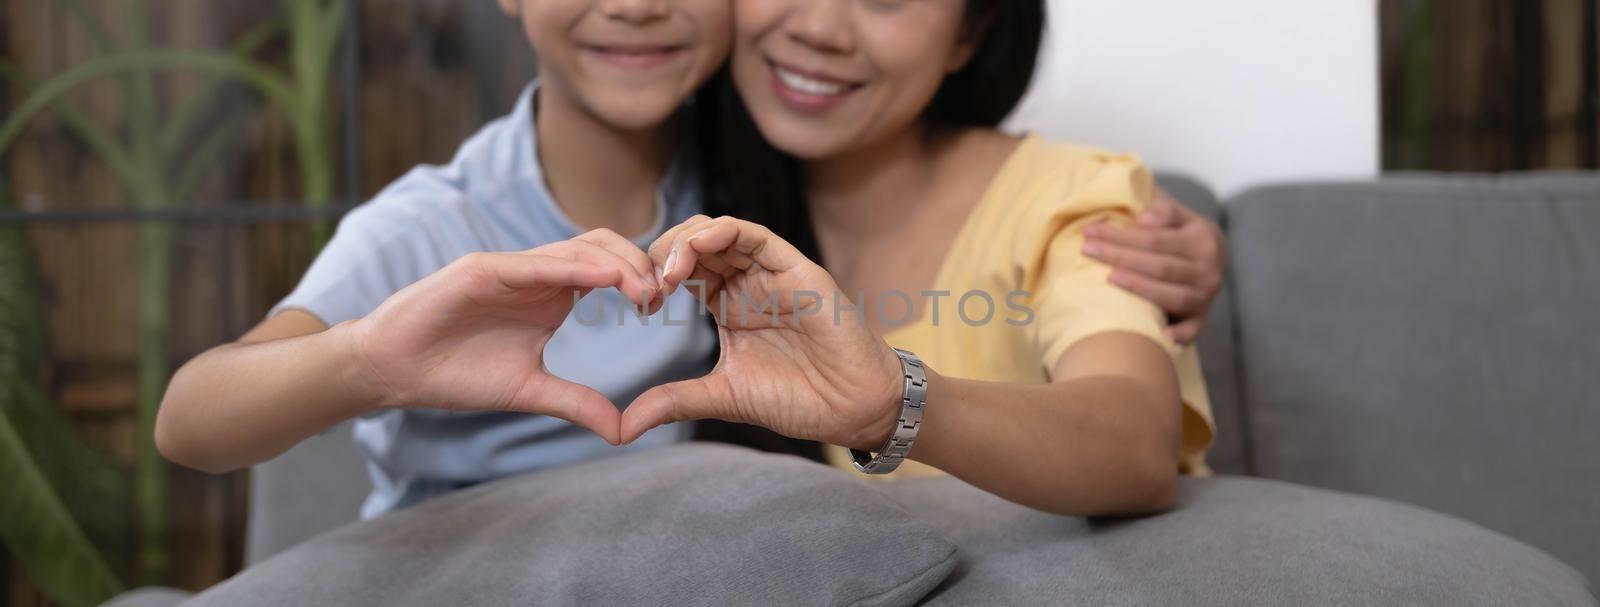 Asian mother and daughter making heart with their hands and smiling to camera. Life insurance, love and support in family relationships concept.